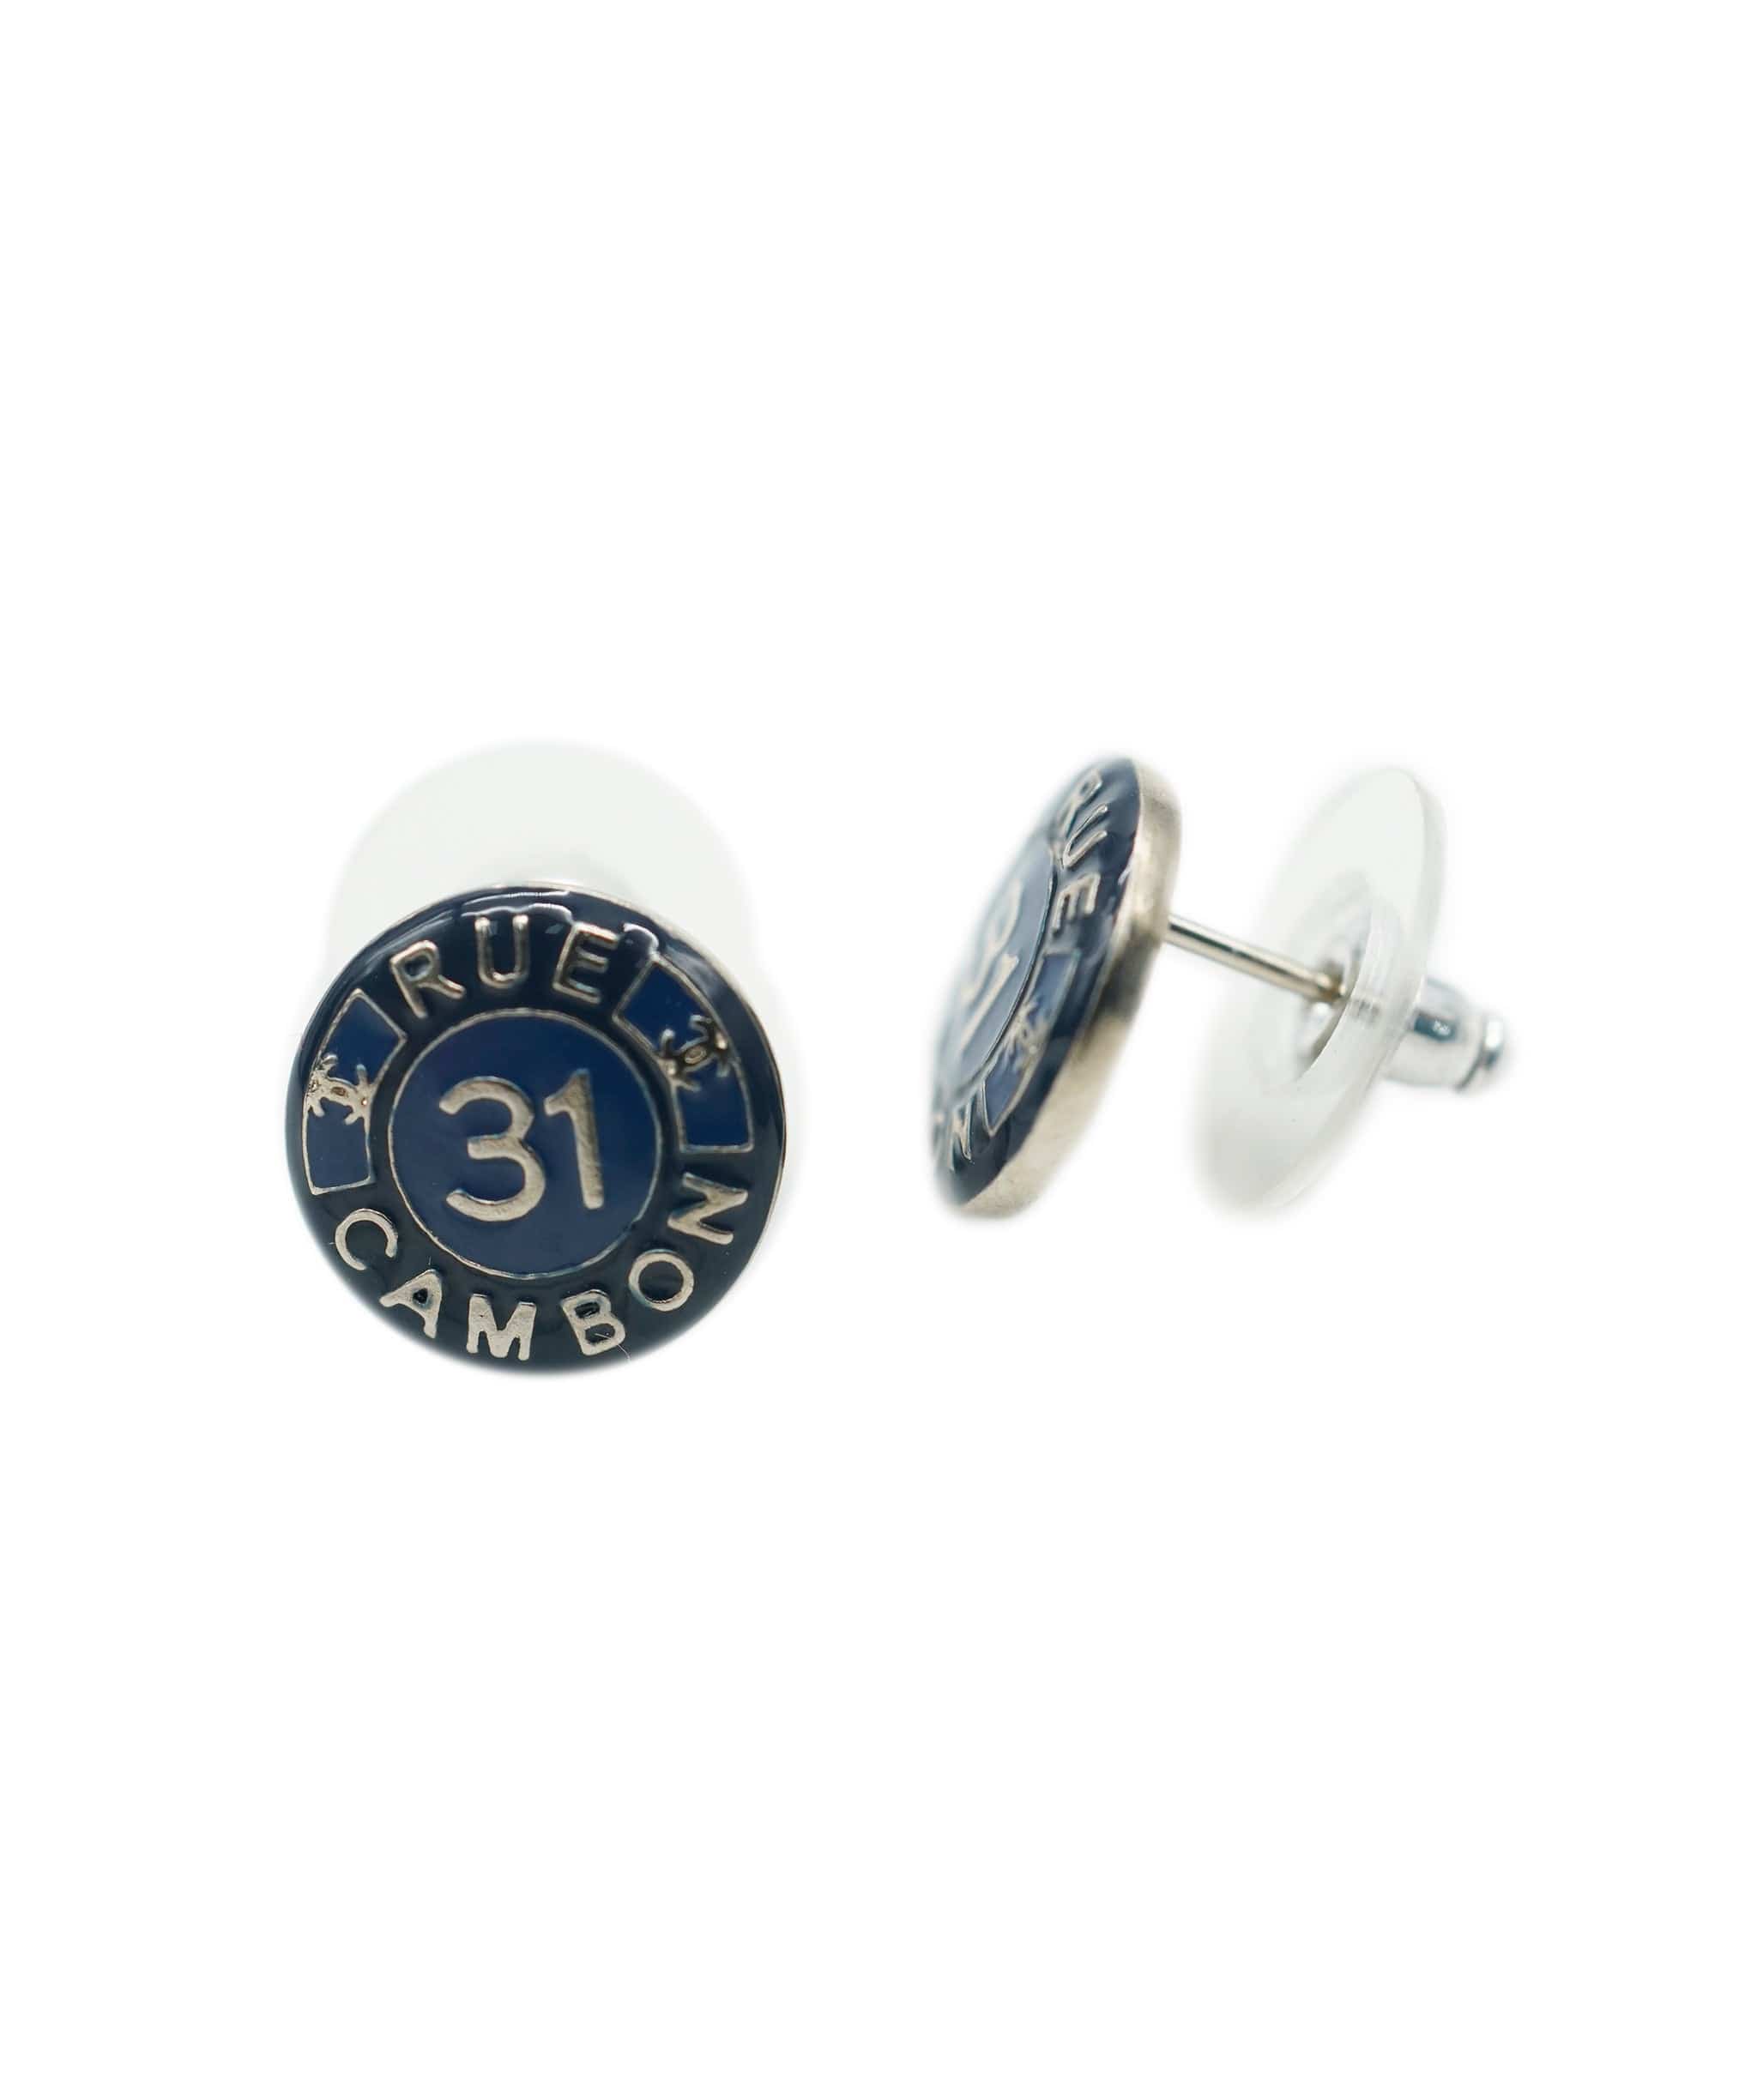 Chanel Chanel blue rue 31 silver cambon studs with box AJL0185